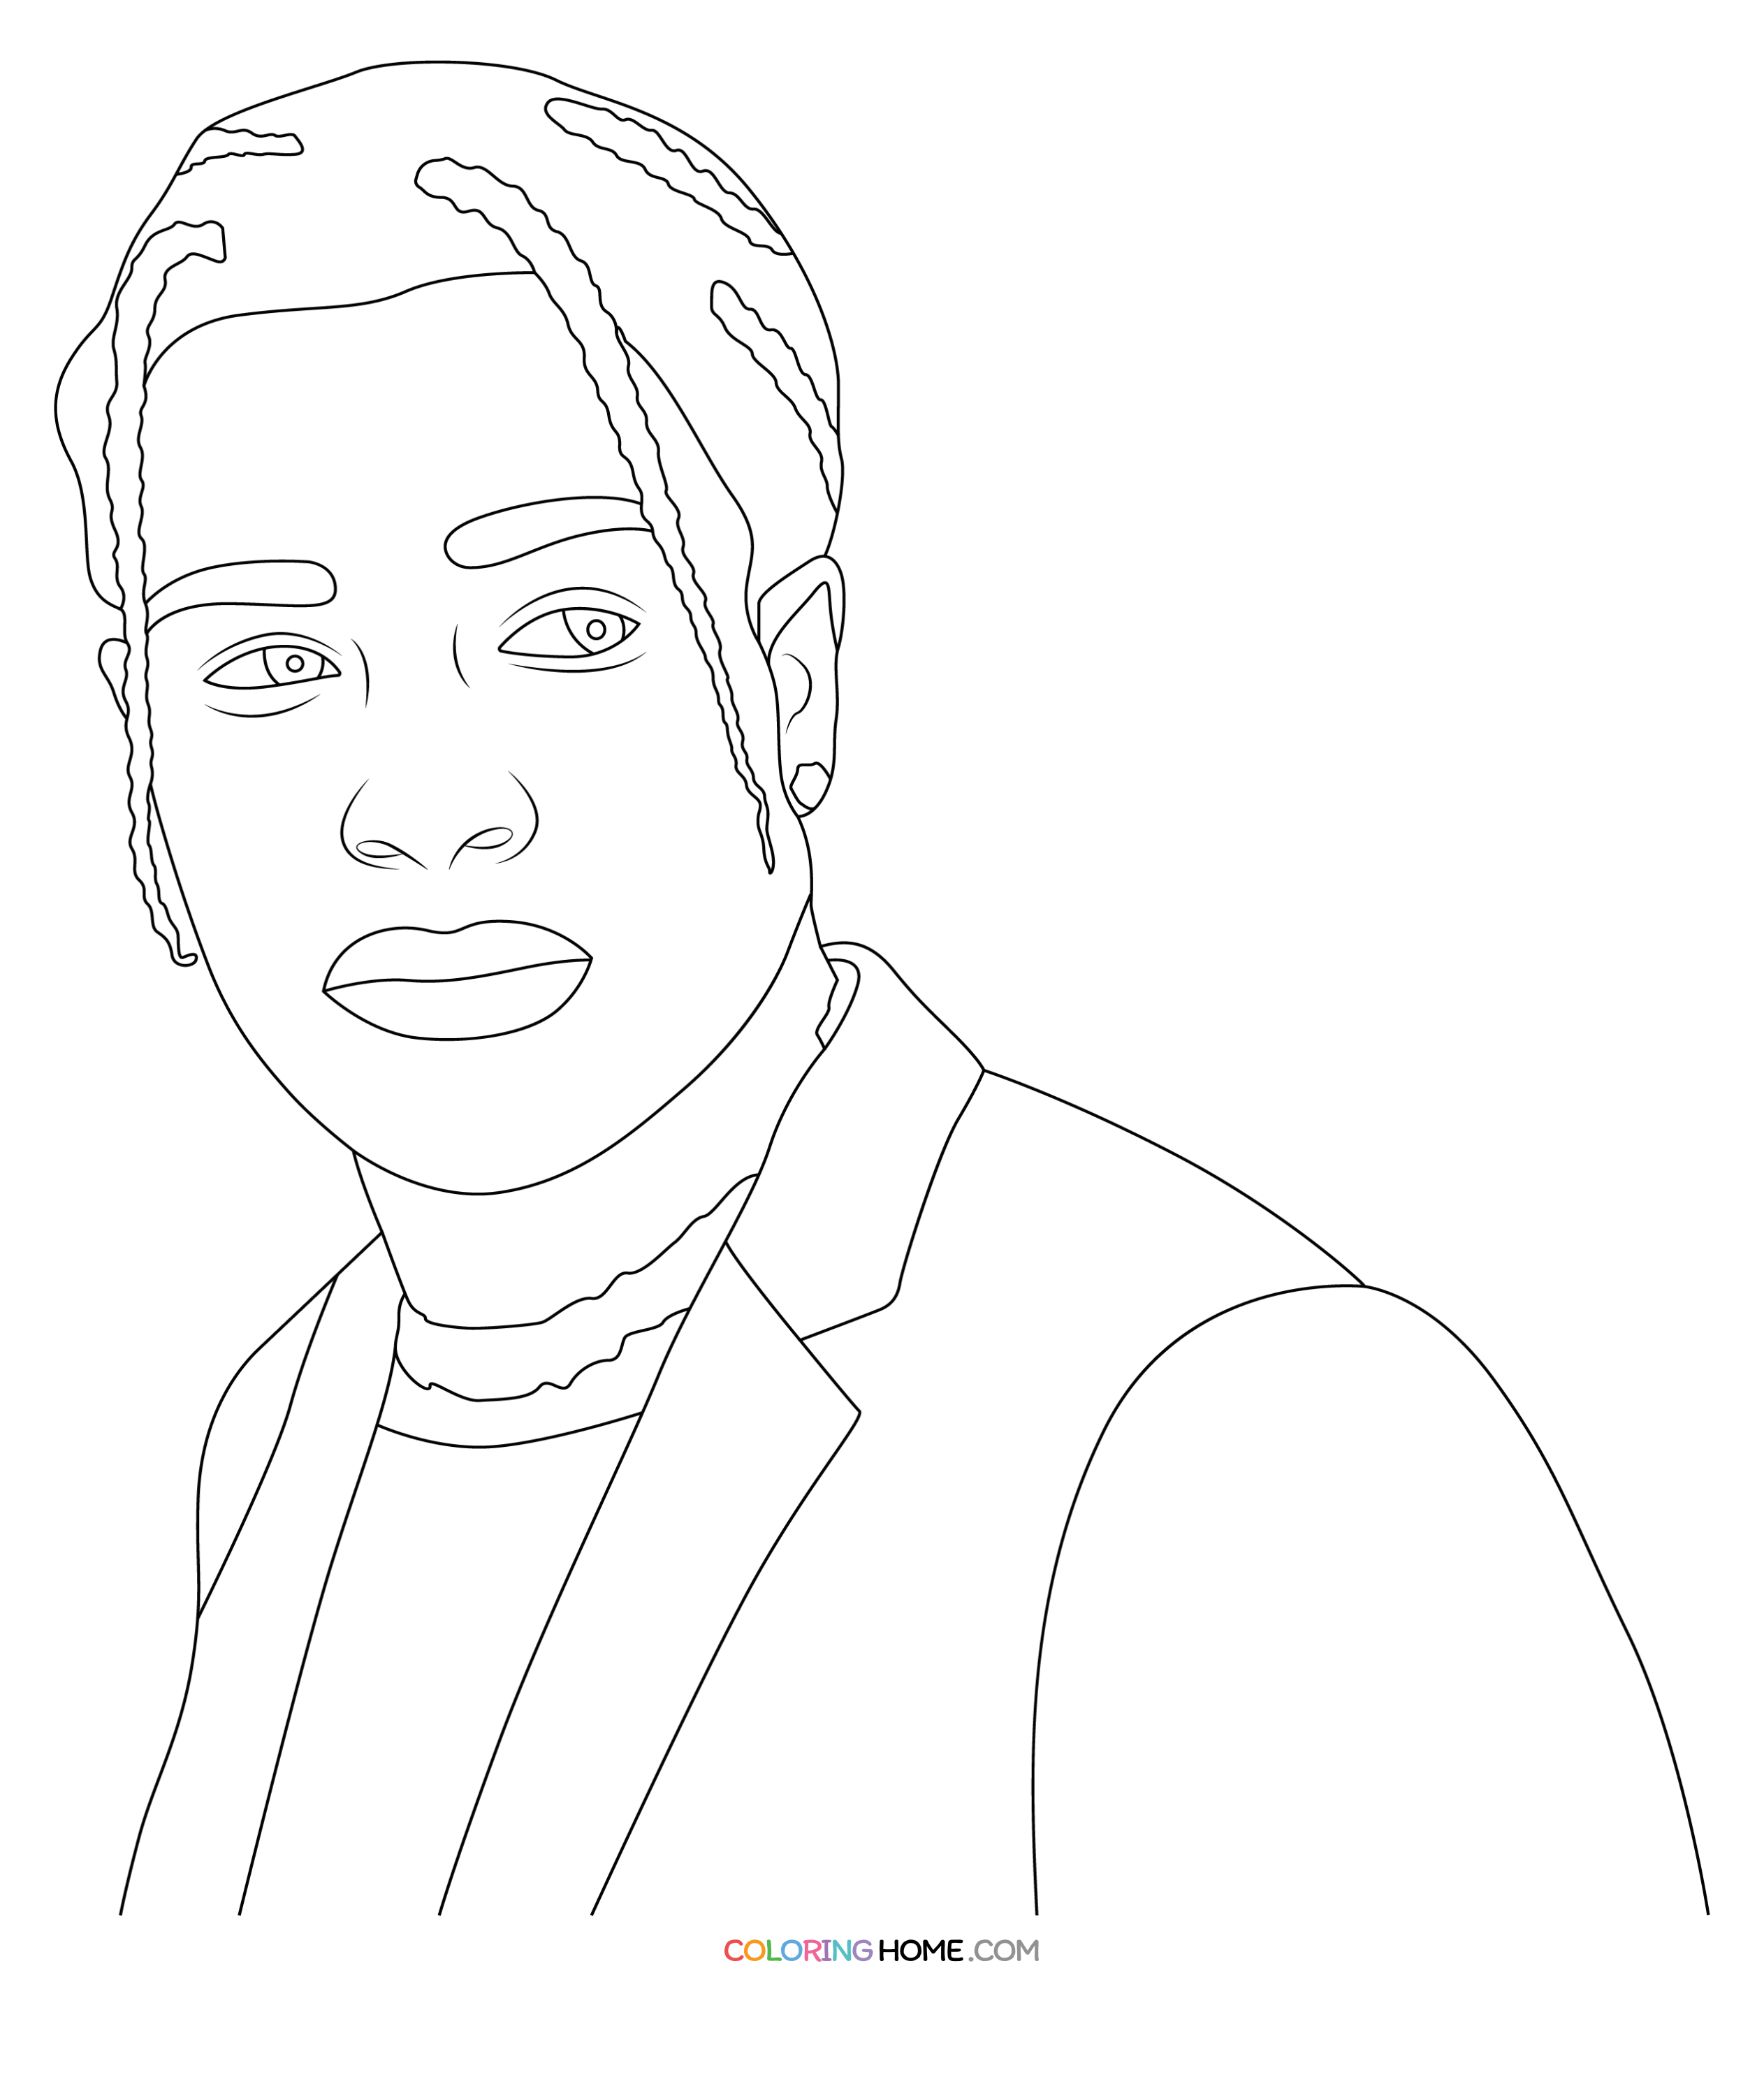 ASAP Rocky coloring page